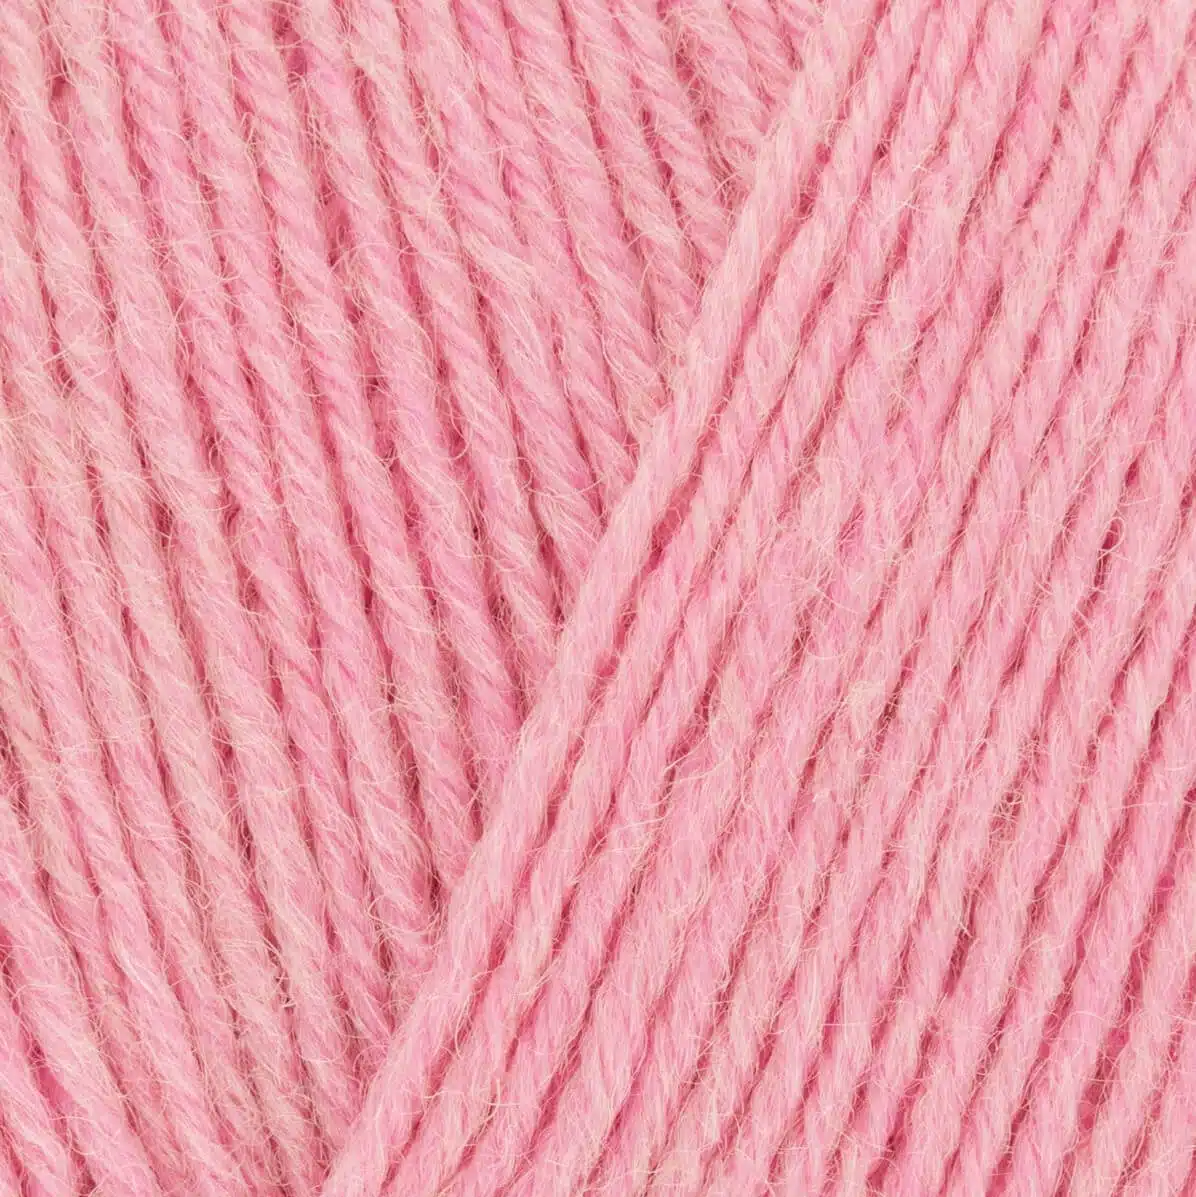 West Yorkshire Spinners Signature 4ply - Candyfloss 547